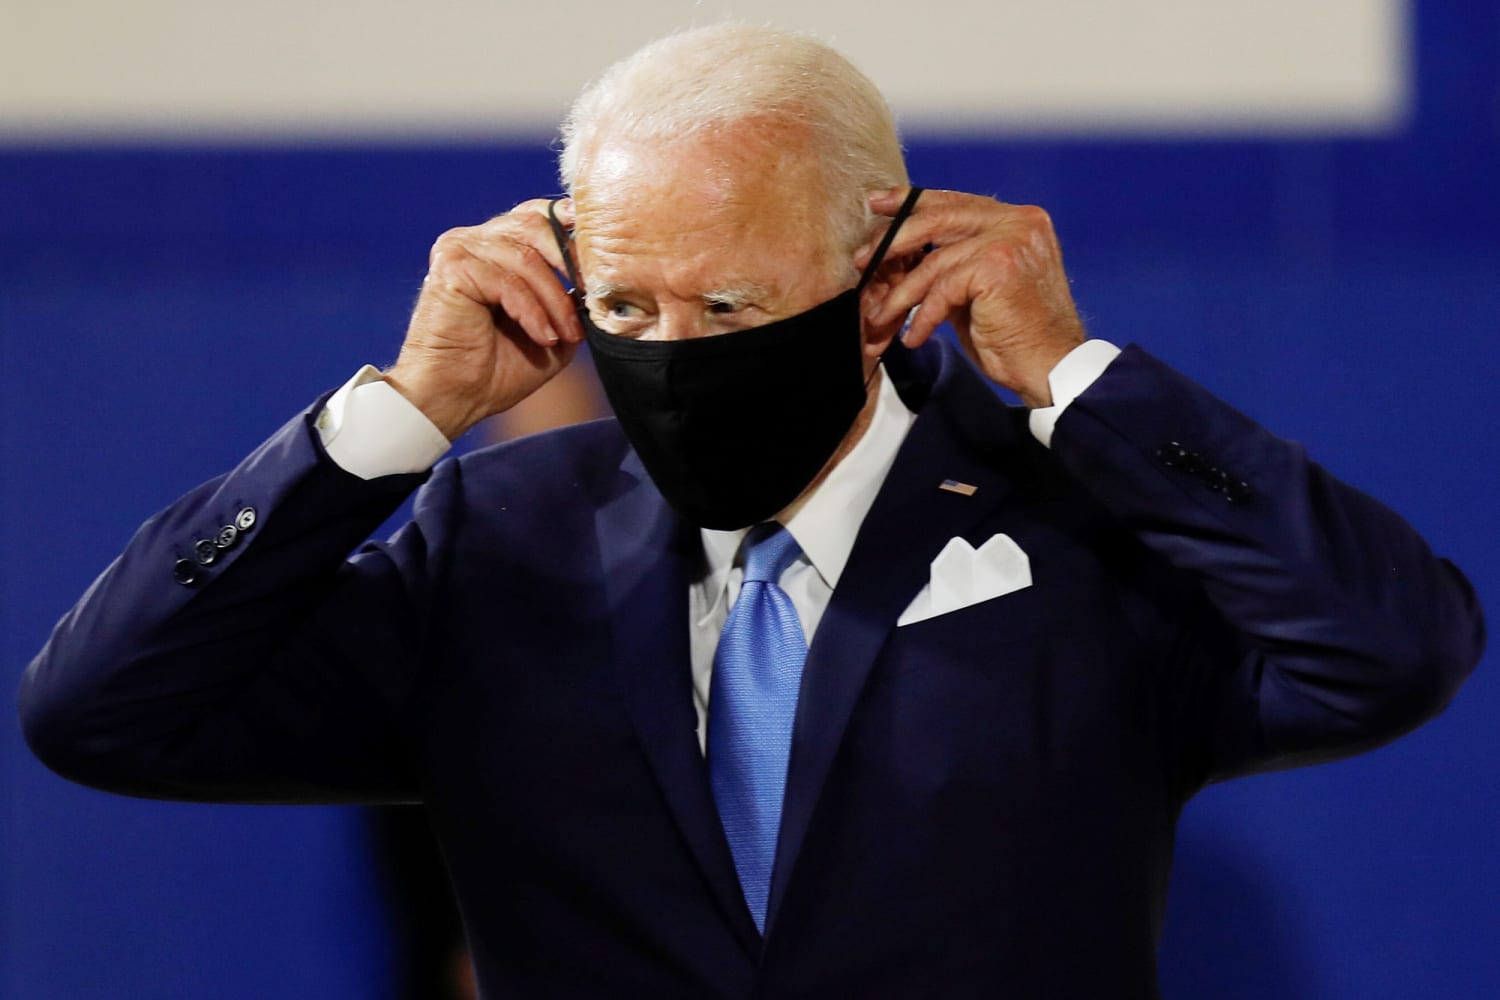 Biden reiterates call for nationwide mask mandates at second event with  Harris